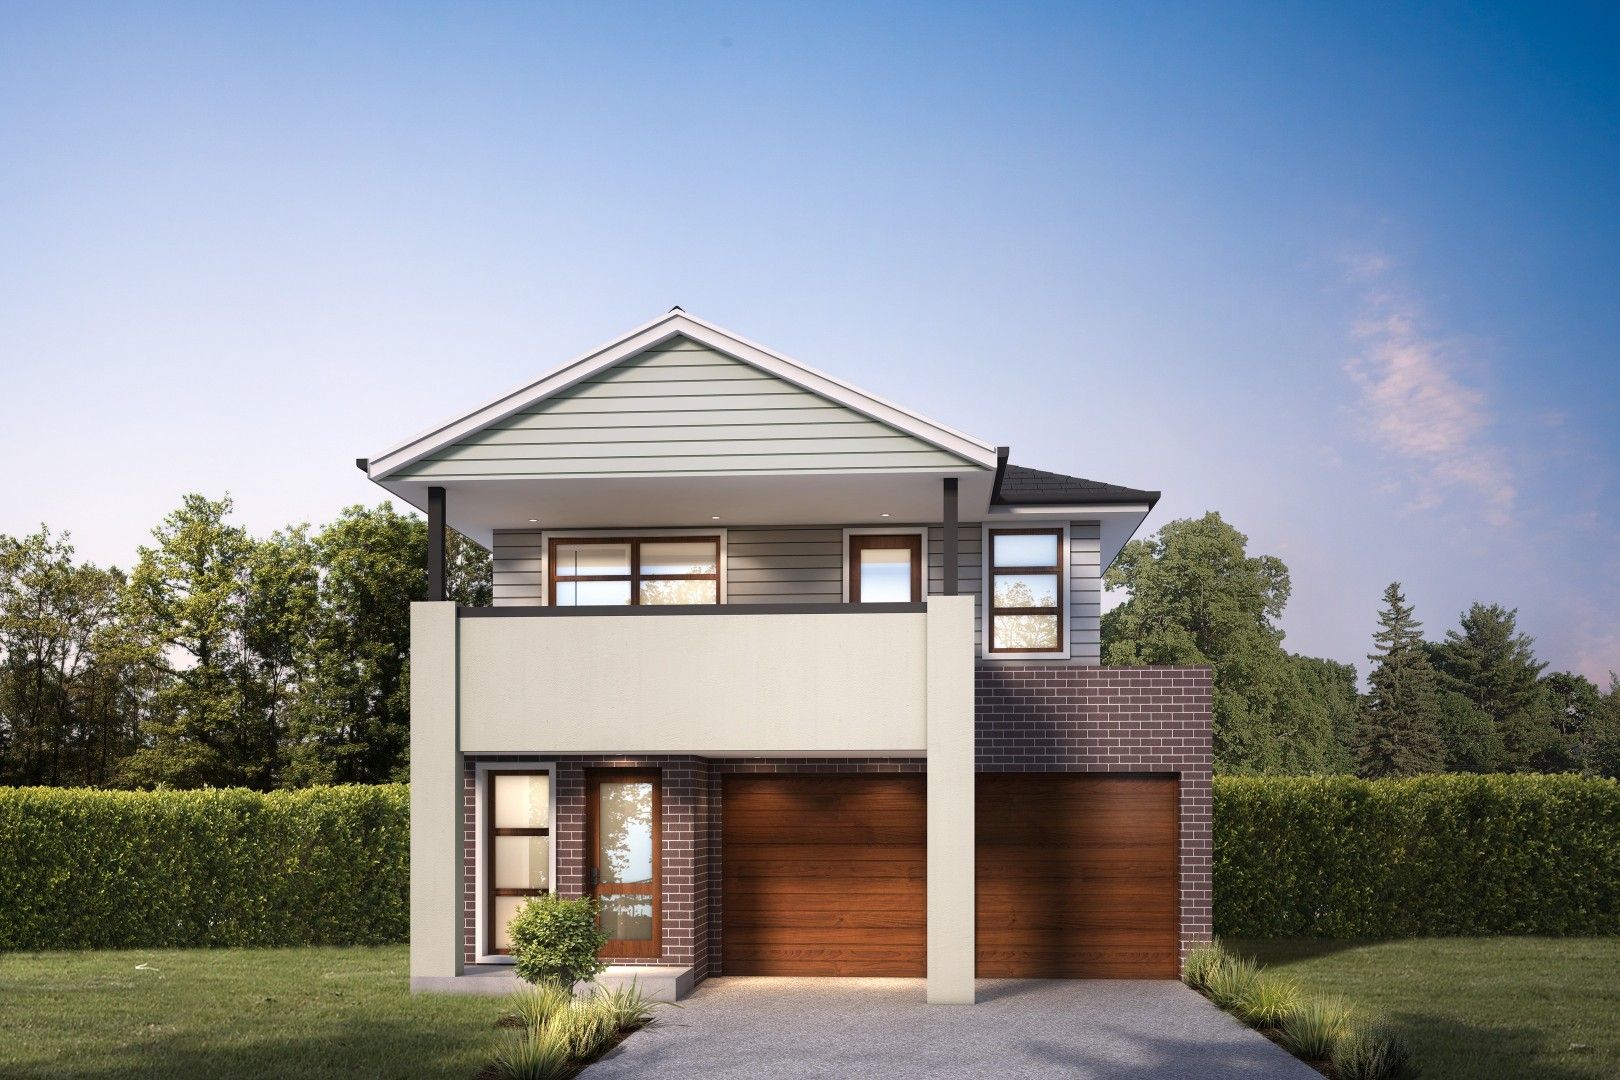 5 bedrooms New House & Land in Lot 84 Constellation Avenue BOX HILL NSW, 2765